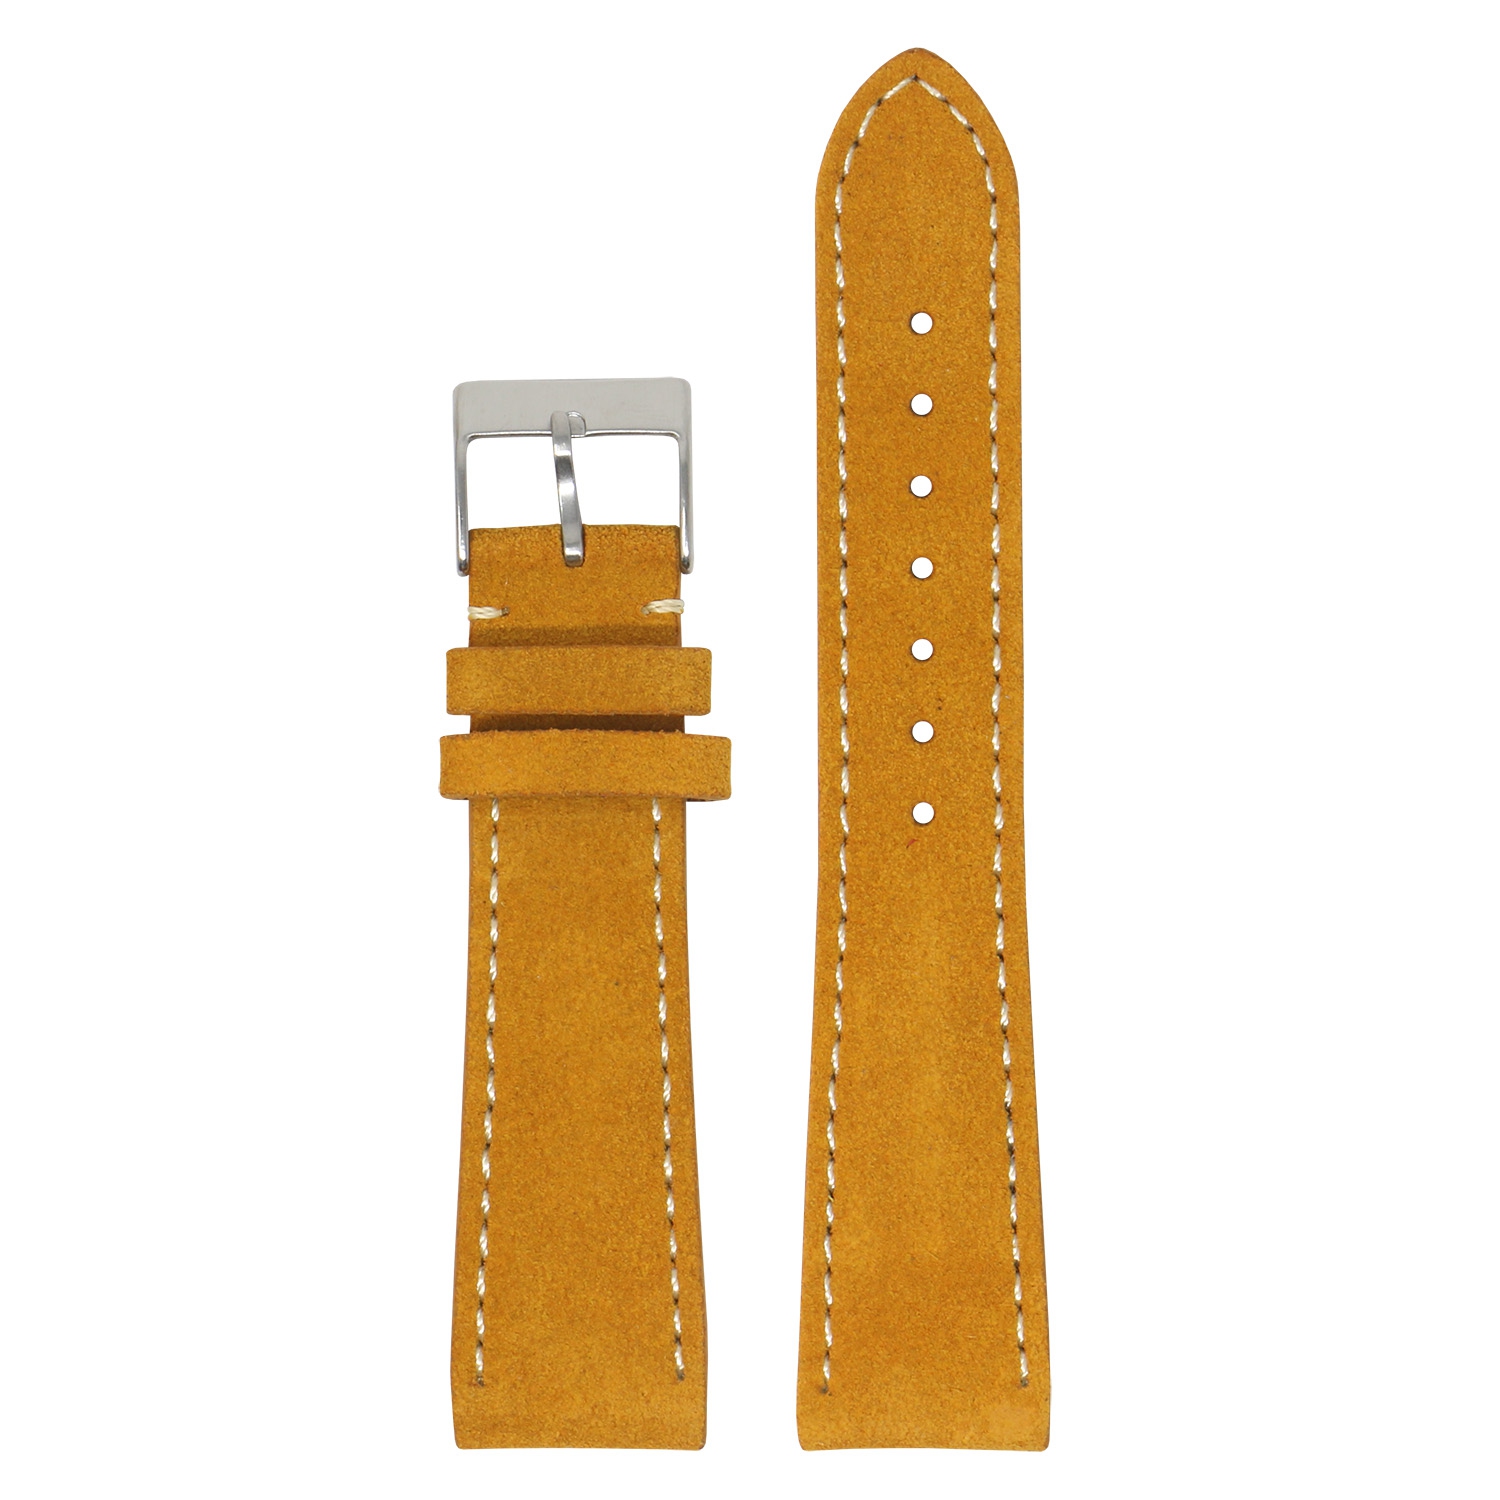 StrapsCo Classic Suede Watch Band Strap (Short, Standard, Long) for Fitbit Charge 4 & Charge 3 - Long - Orange